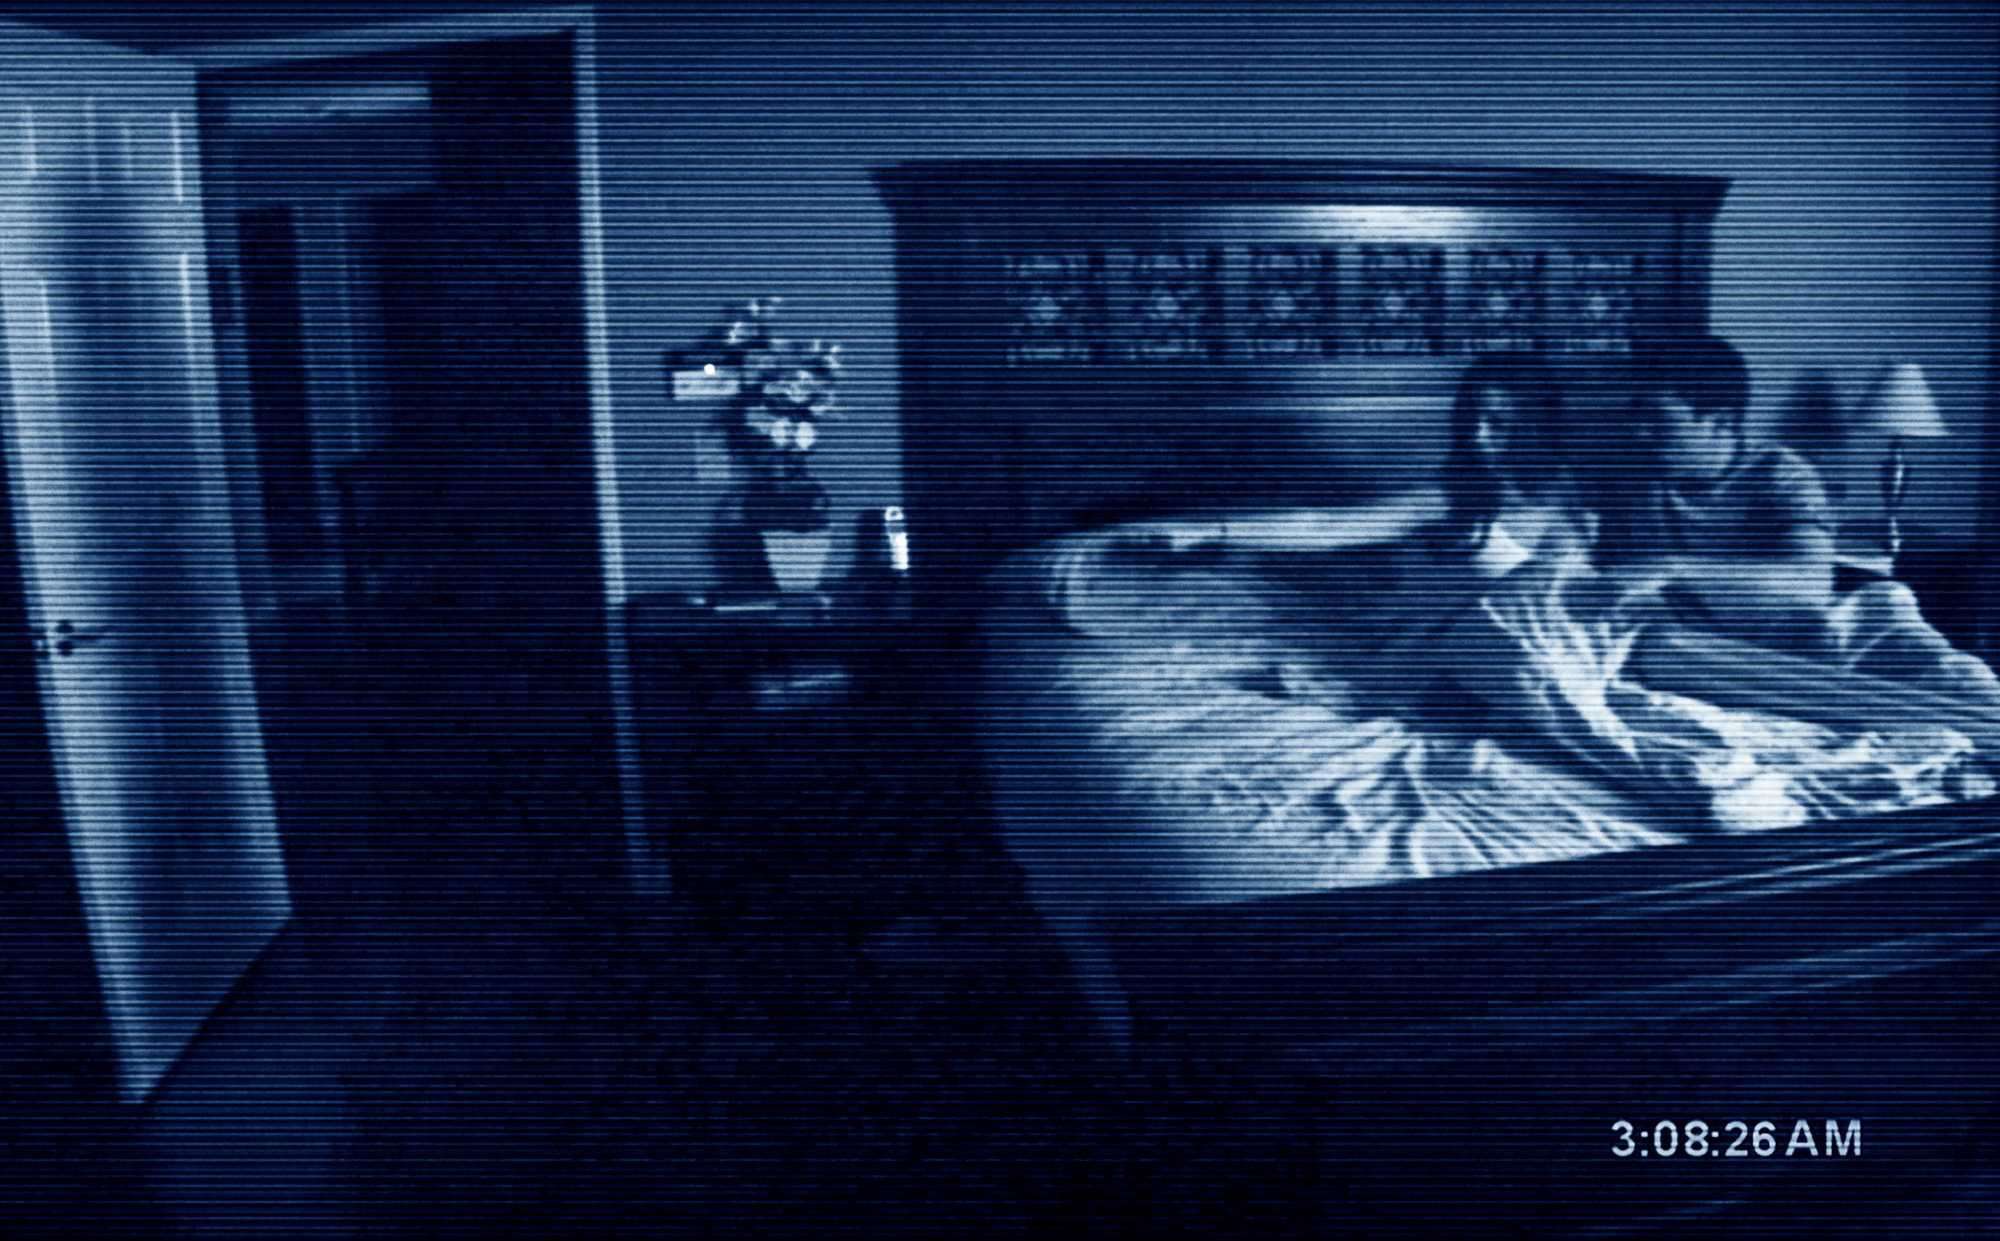 Paranormal Activity opened this week in movie history